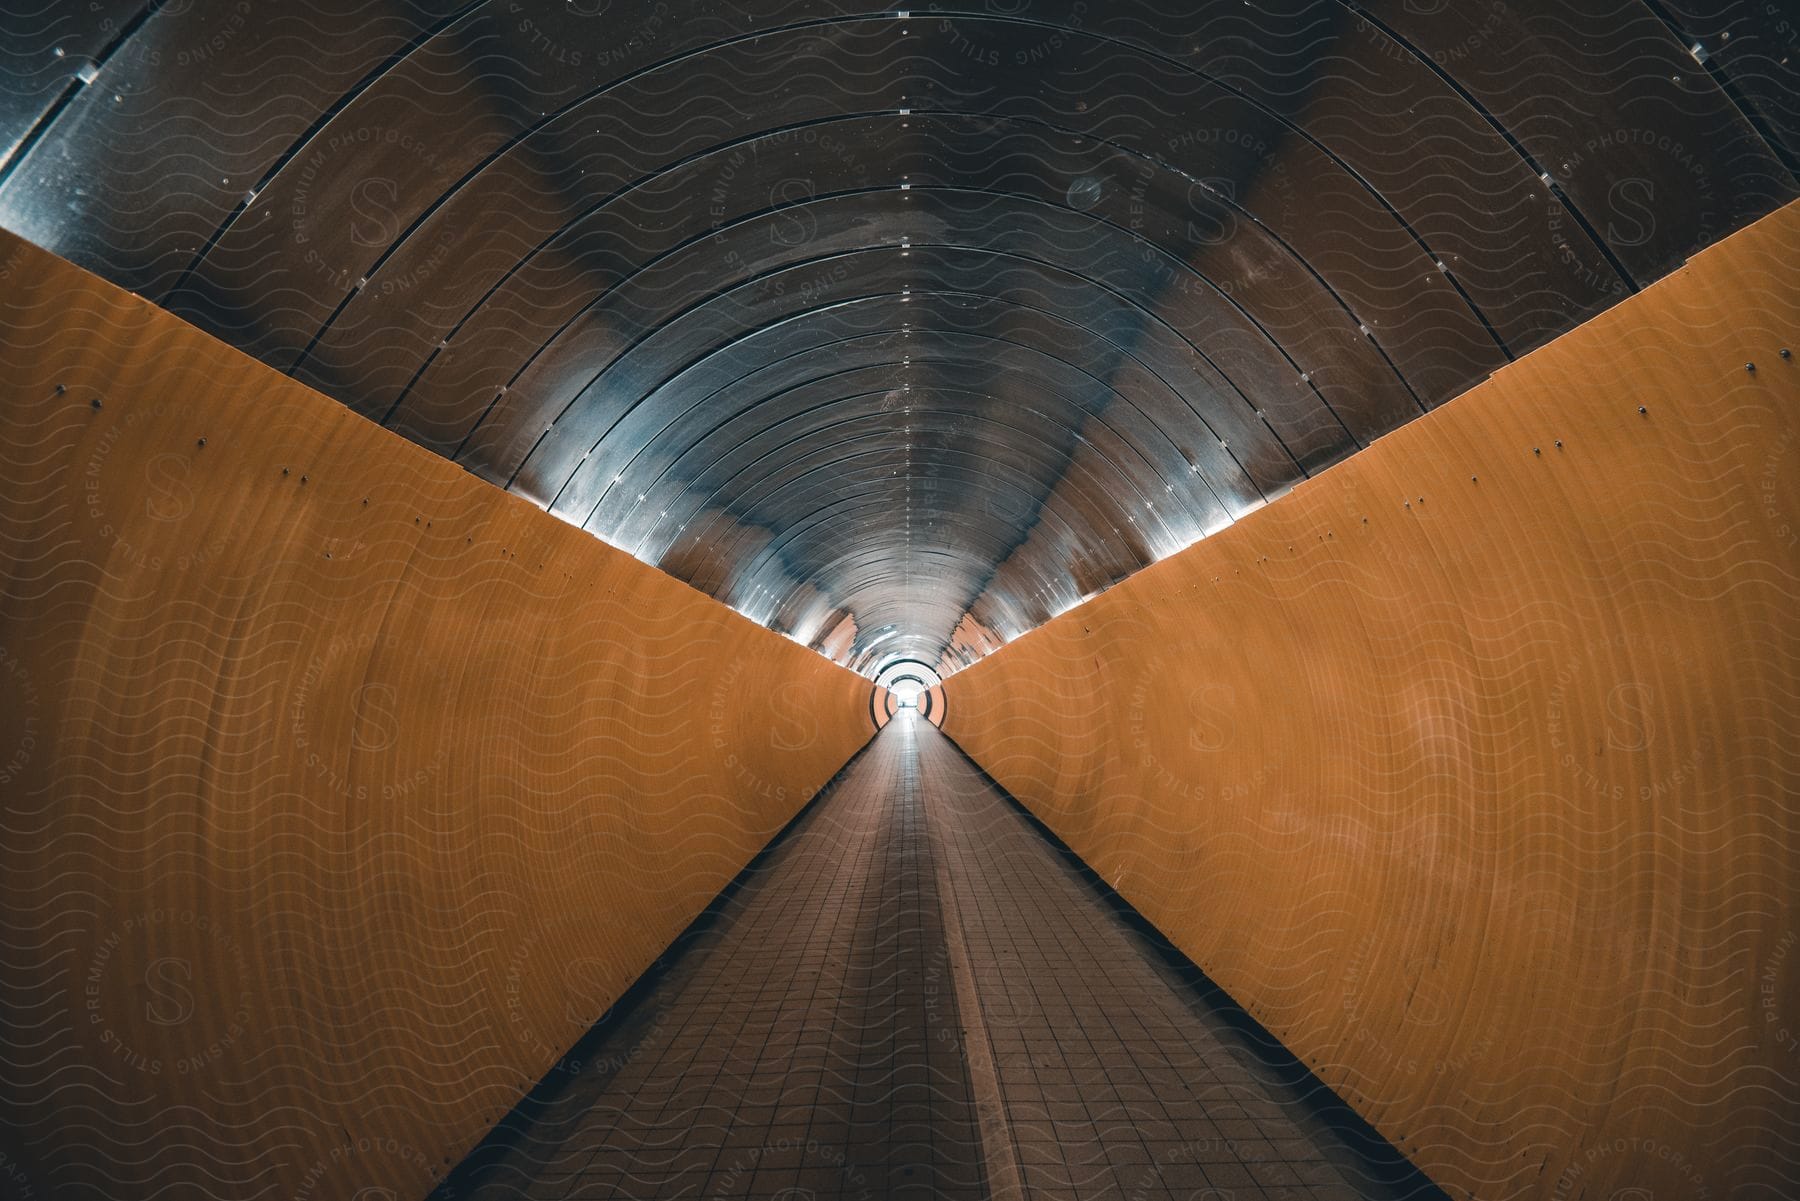 A long tunnel with a round metal ceiling and painted yellow culvert walls